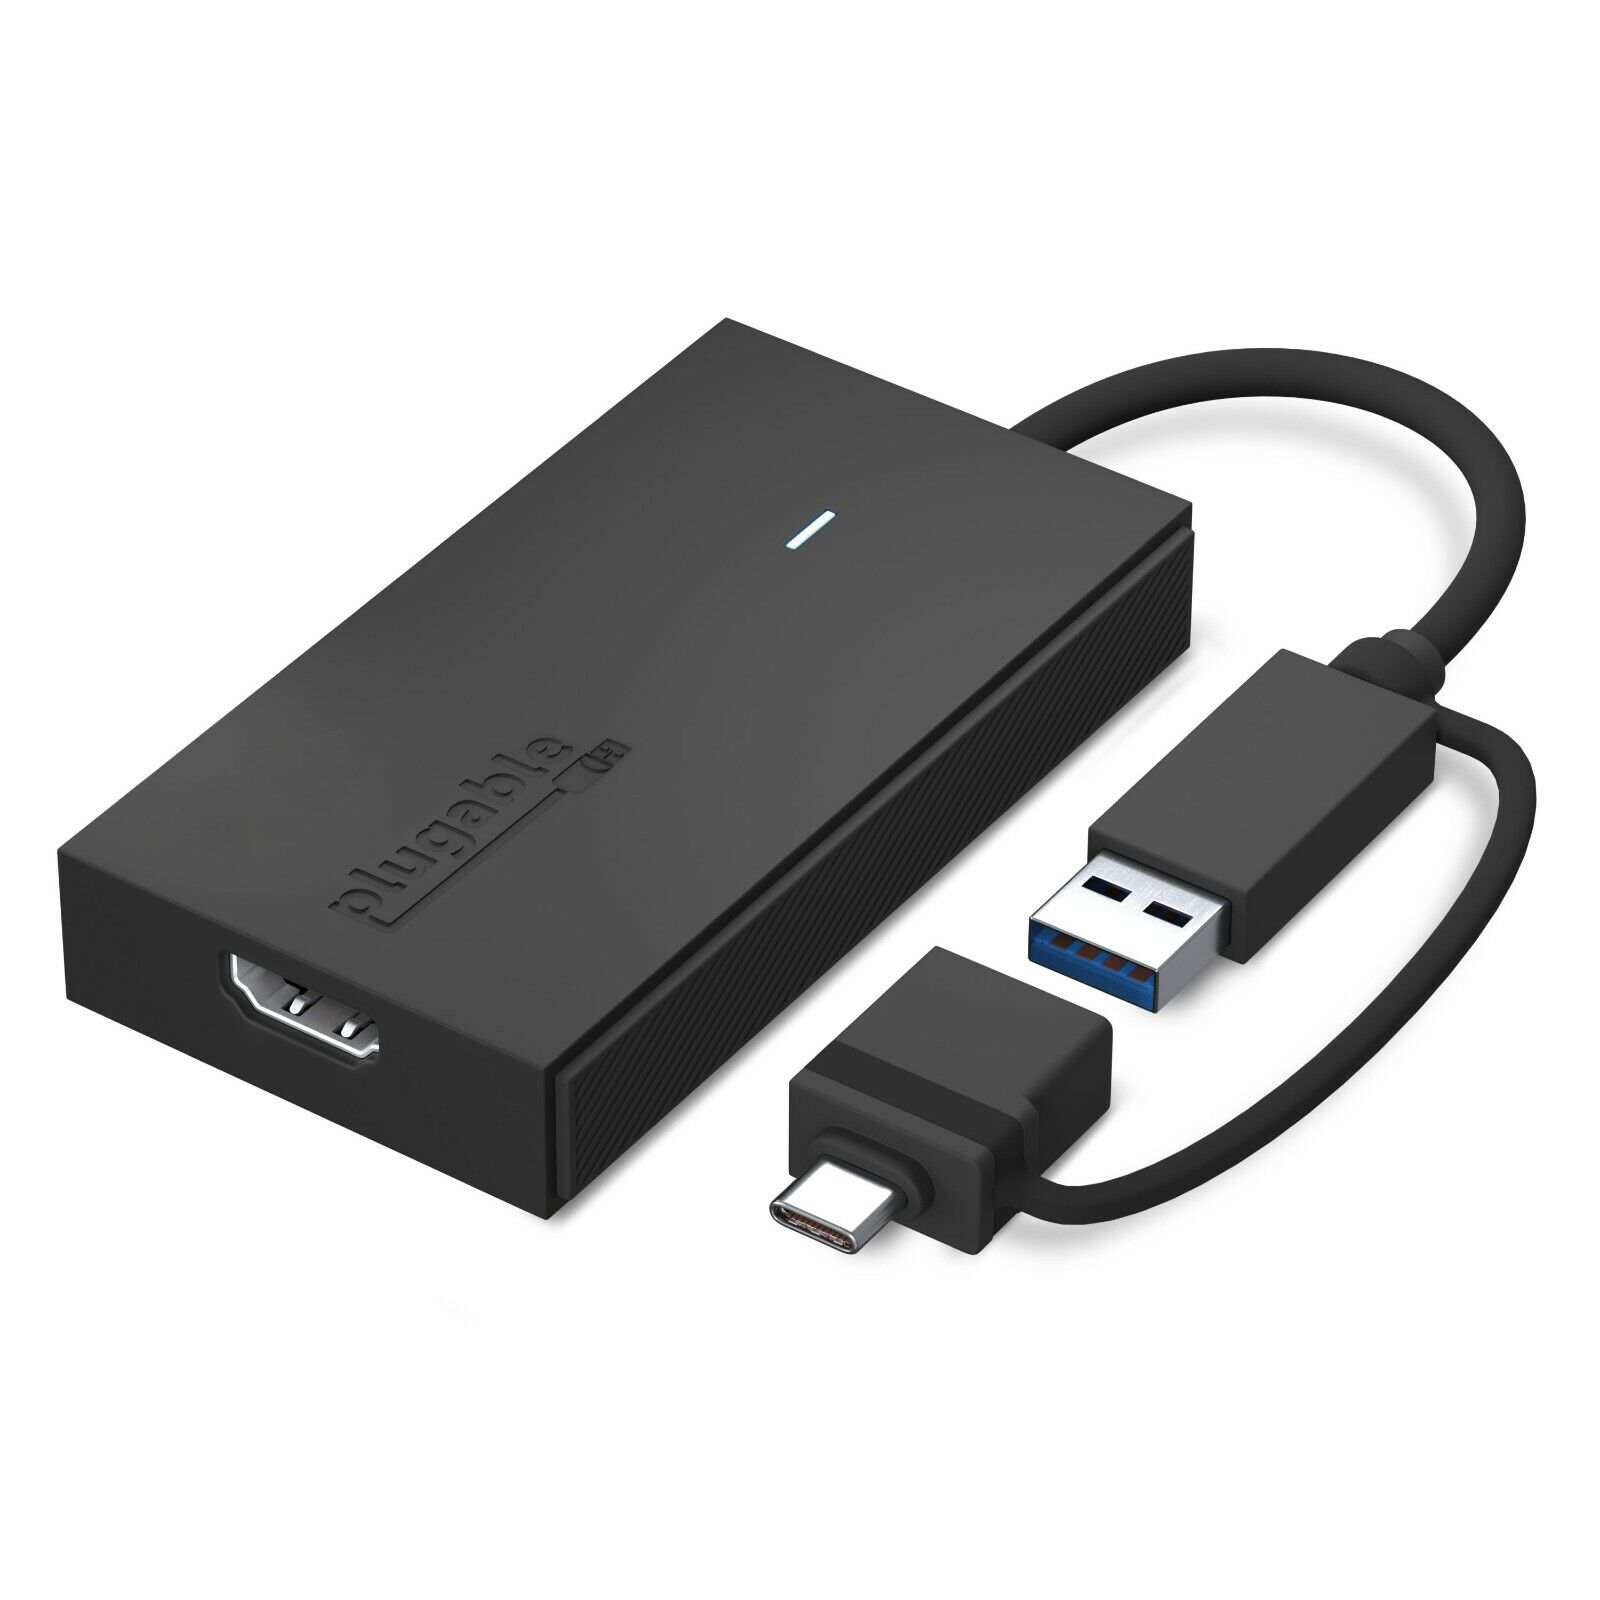 Plugable USB C or USB 3.0 to HDMI Adapter, for Mac and Windows